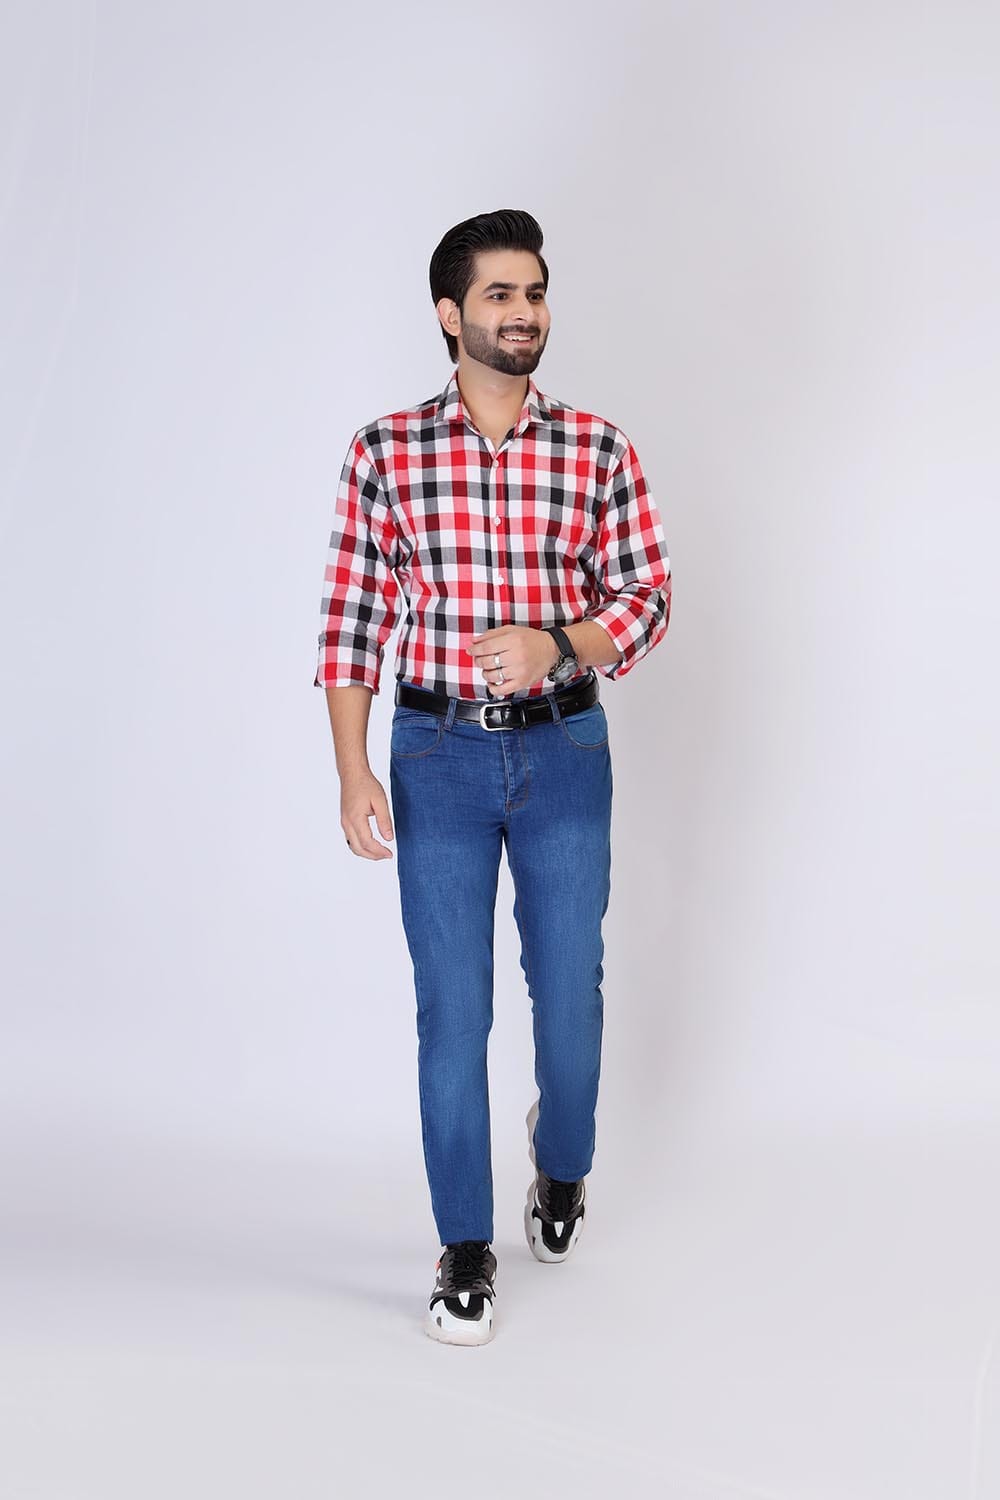 Hope Not Out by Shahid Afridi Men Casual Shirt Red and Black Check Full Sleeve Casual Shirt